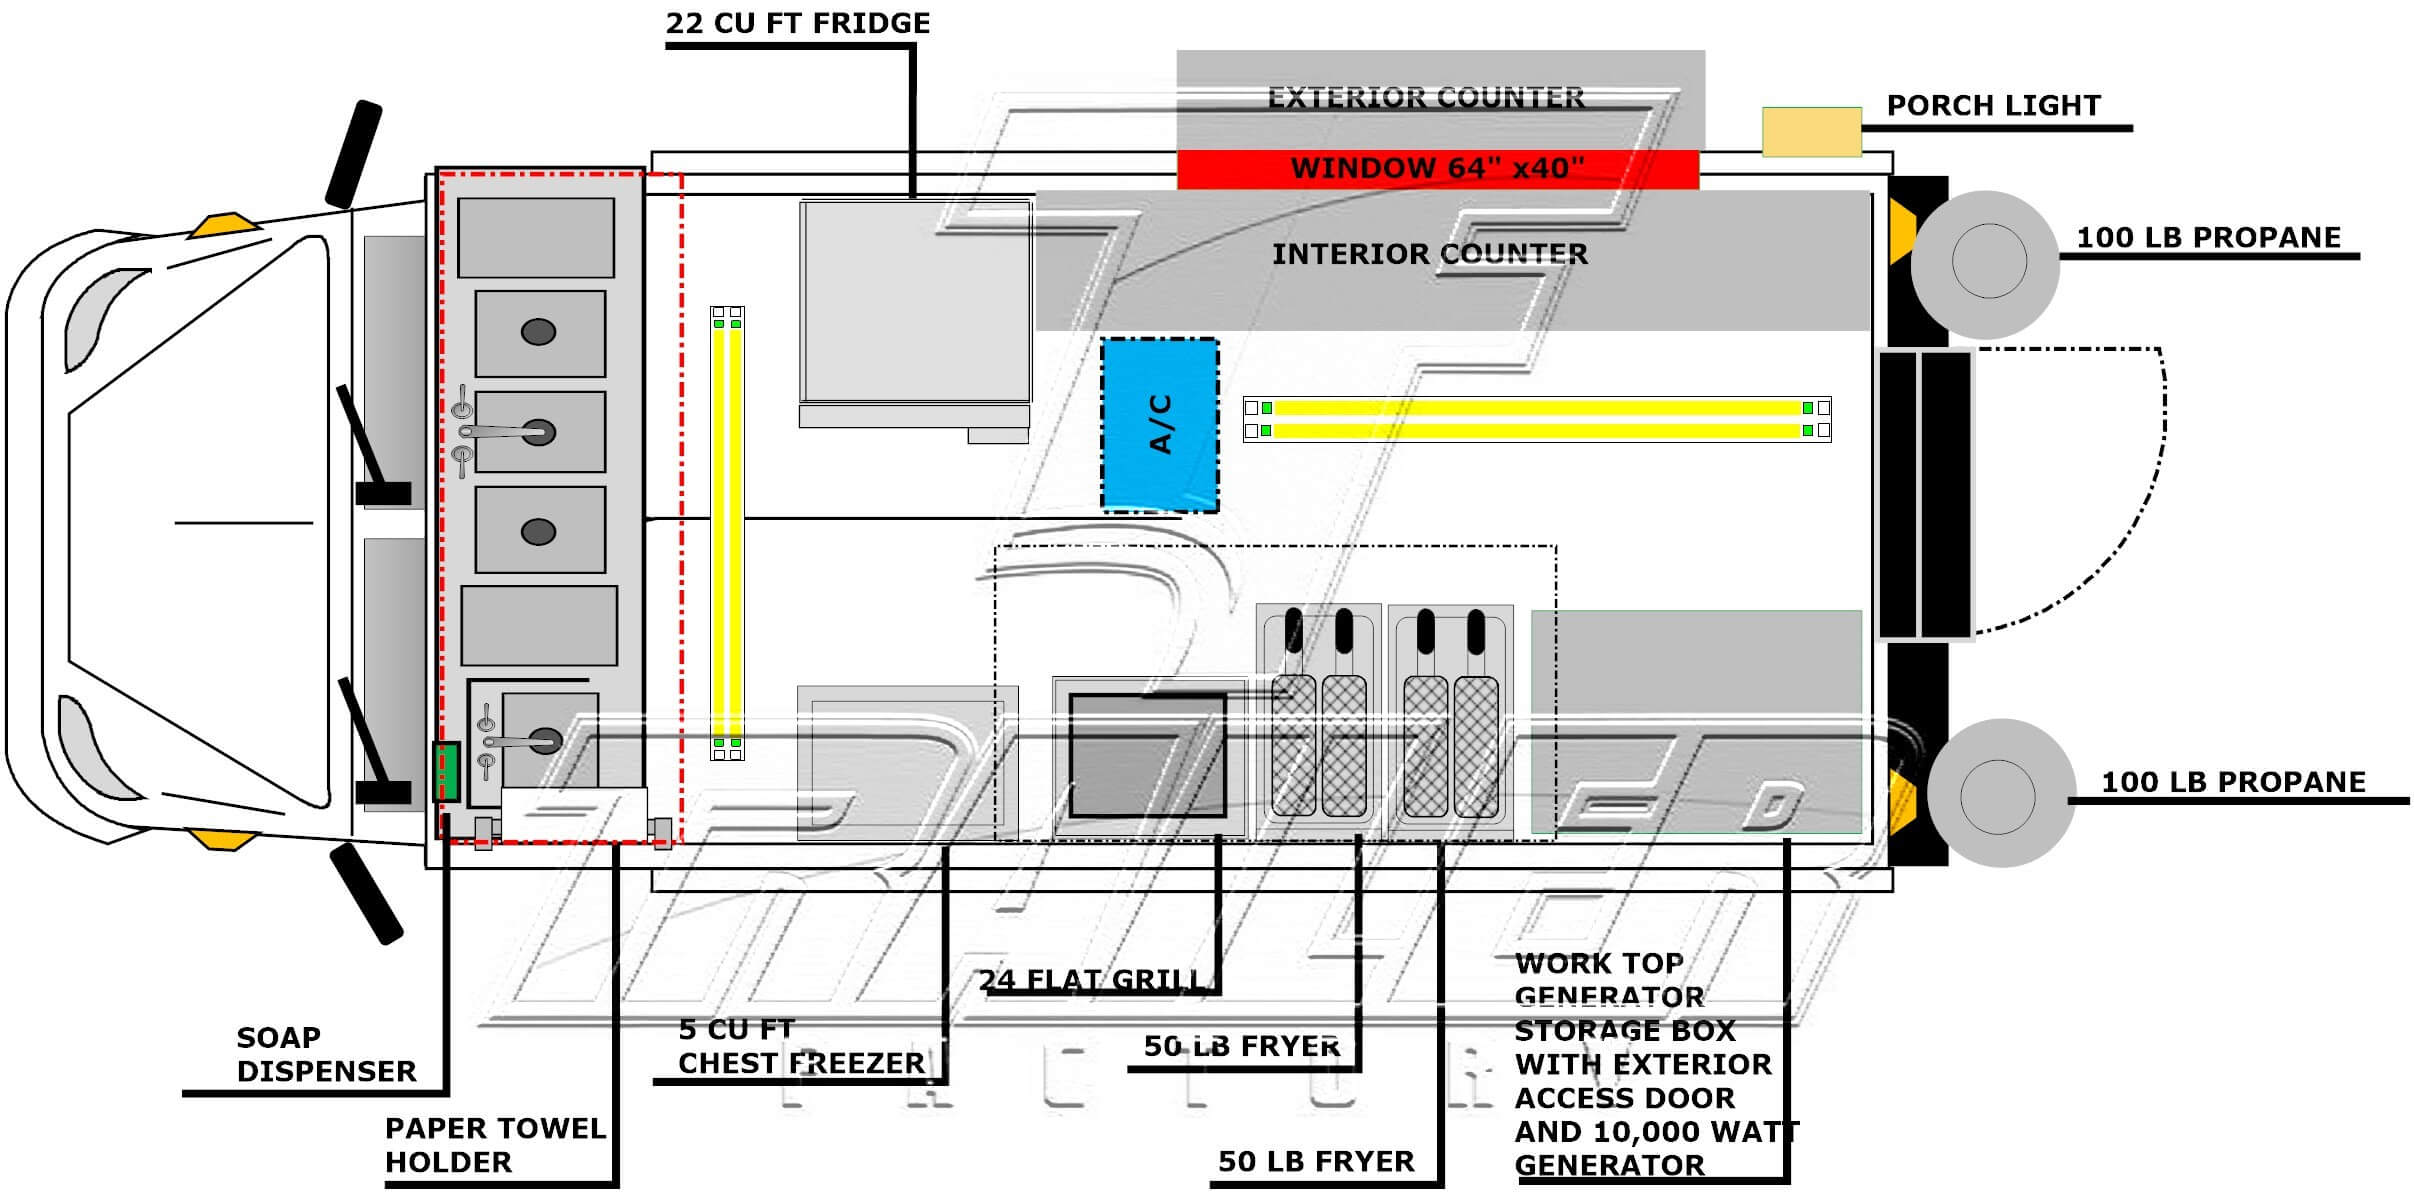 10' x 14' Food Truck Floorplan and Specifications